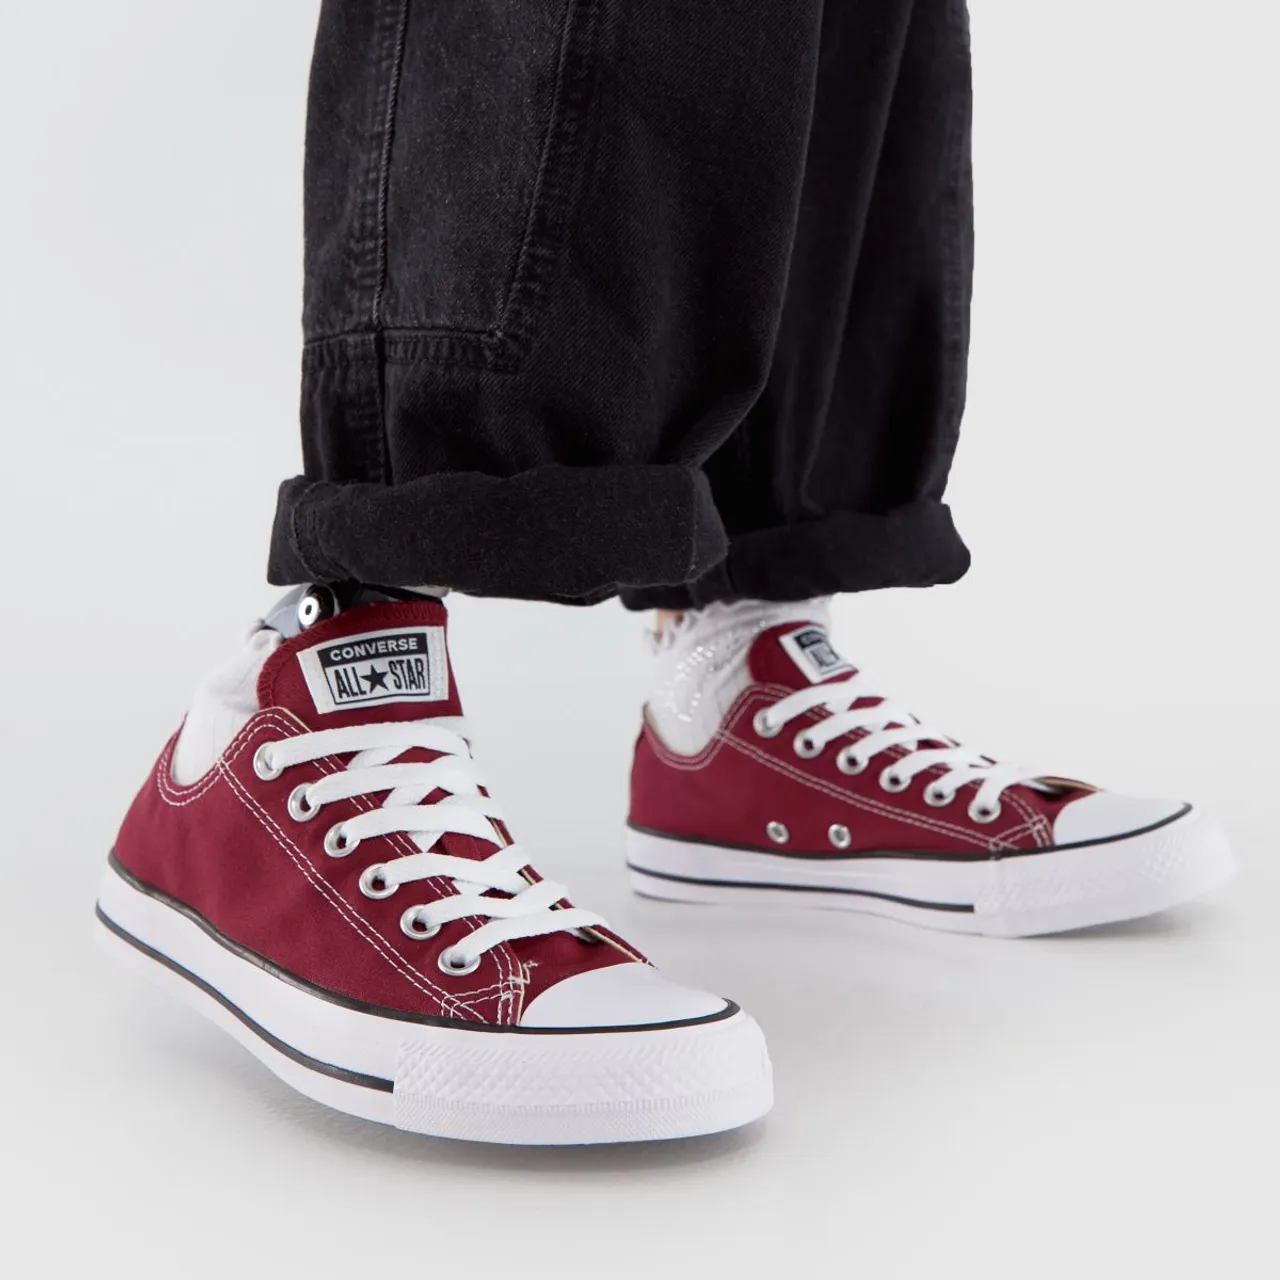 Converse All Star Oxford Trainers In Burgundy